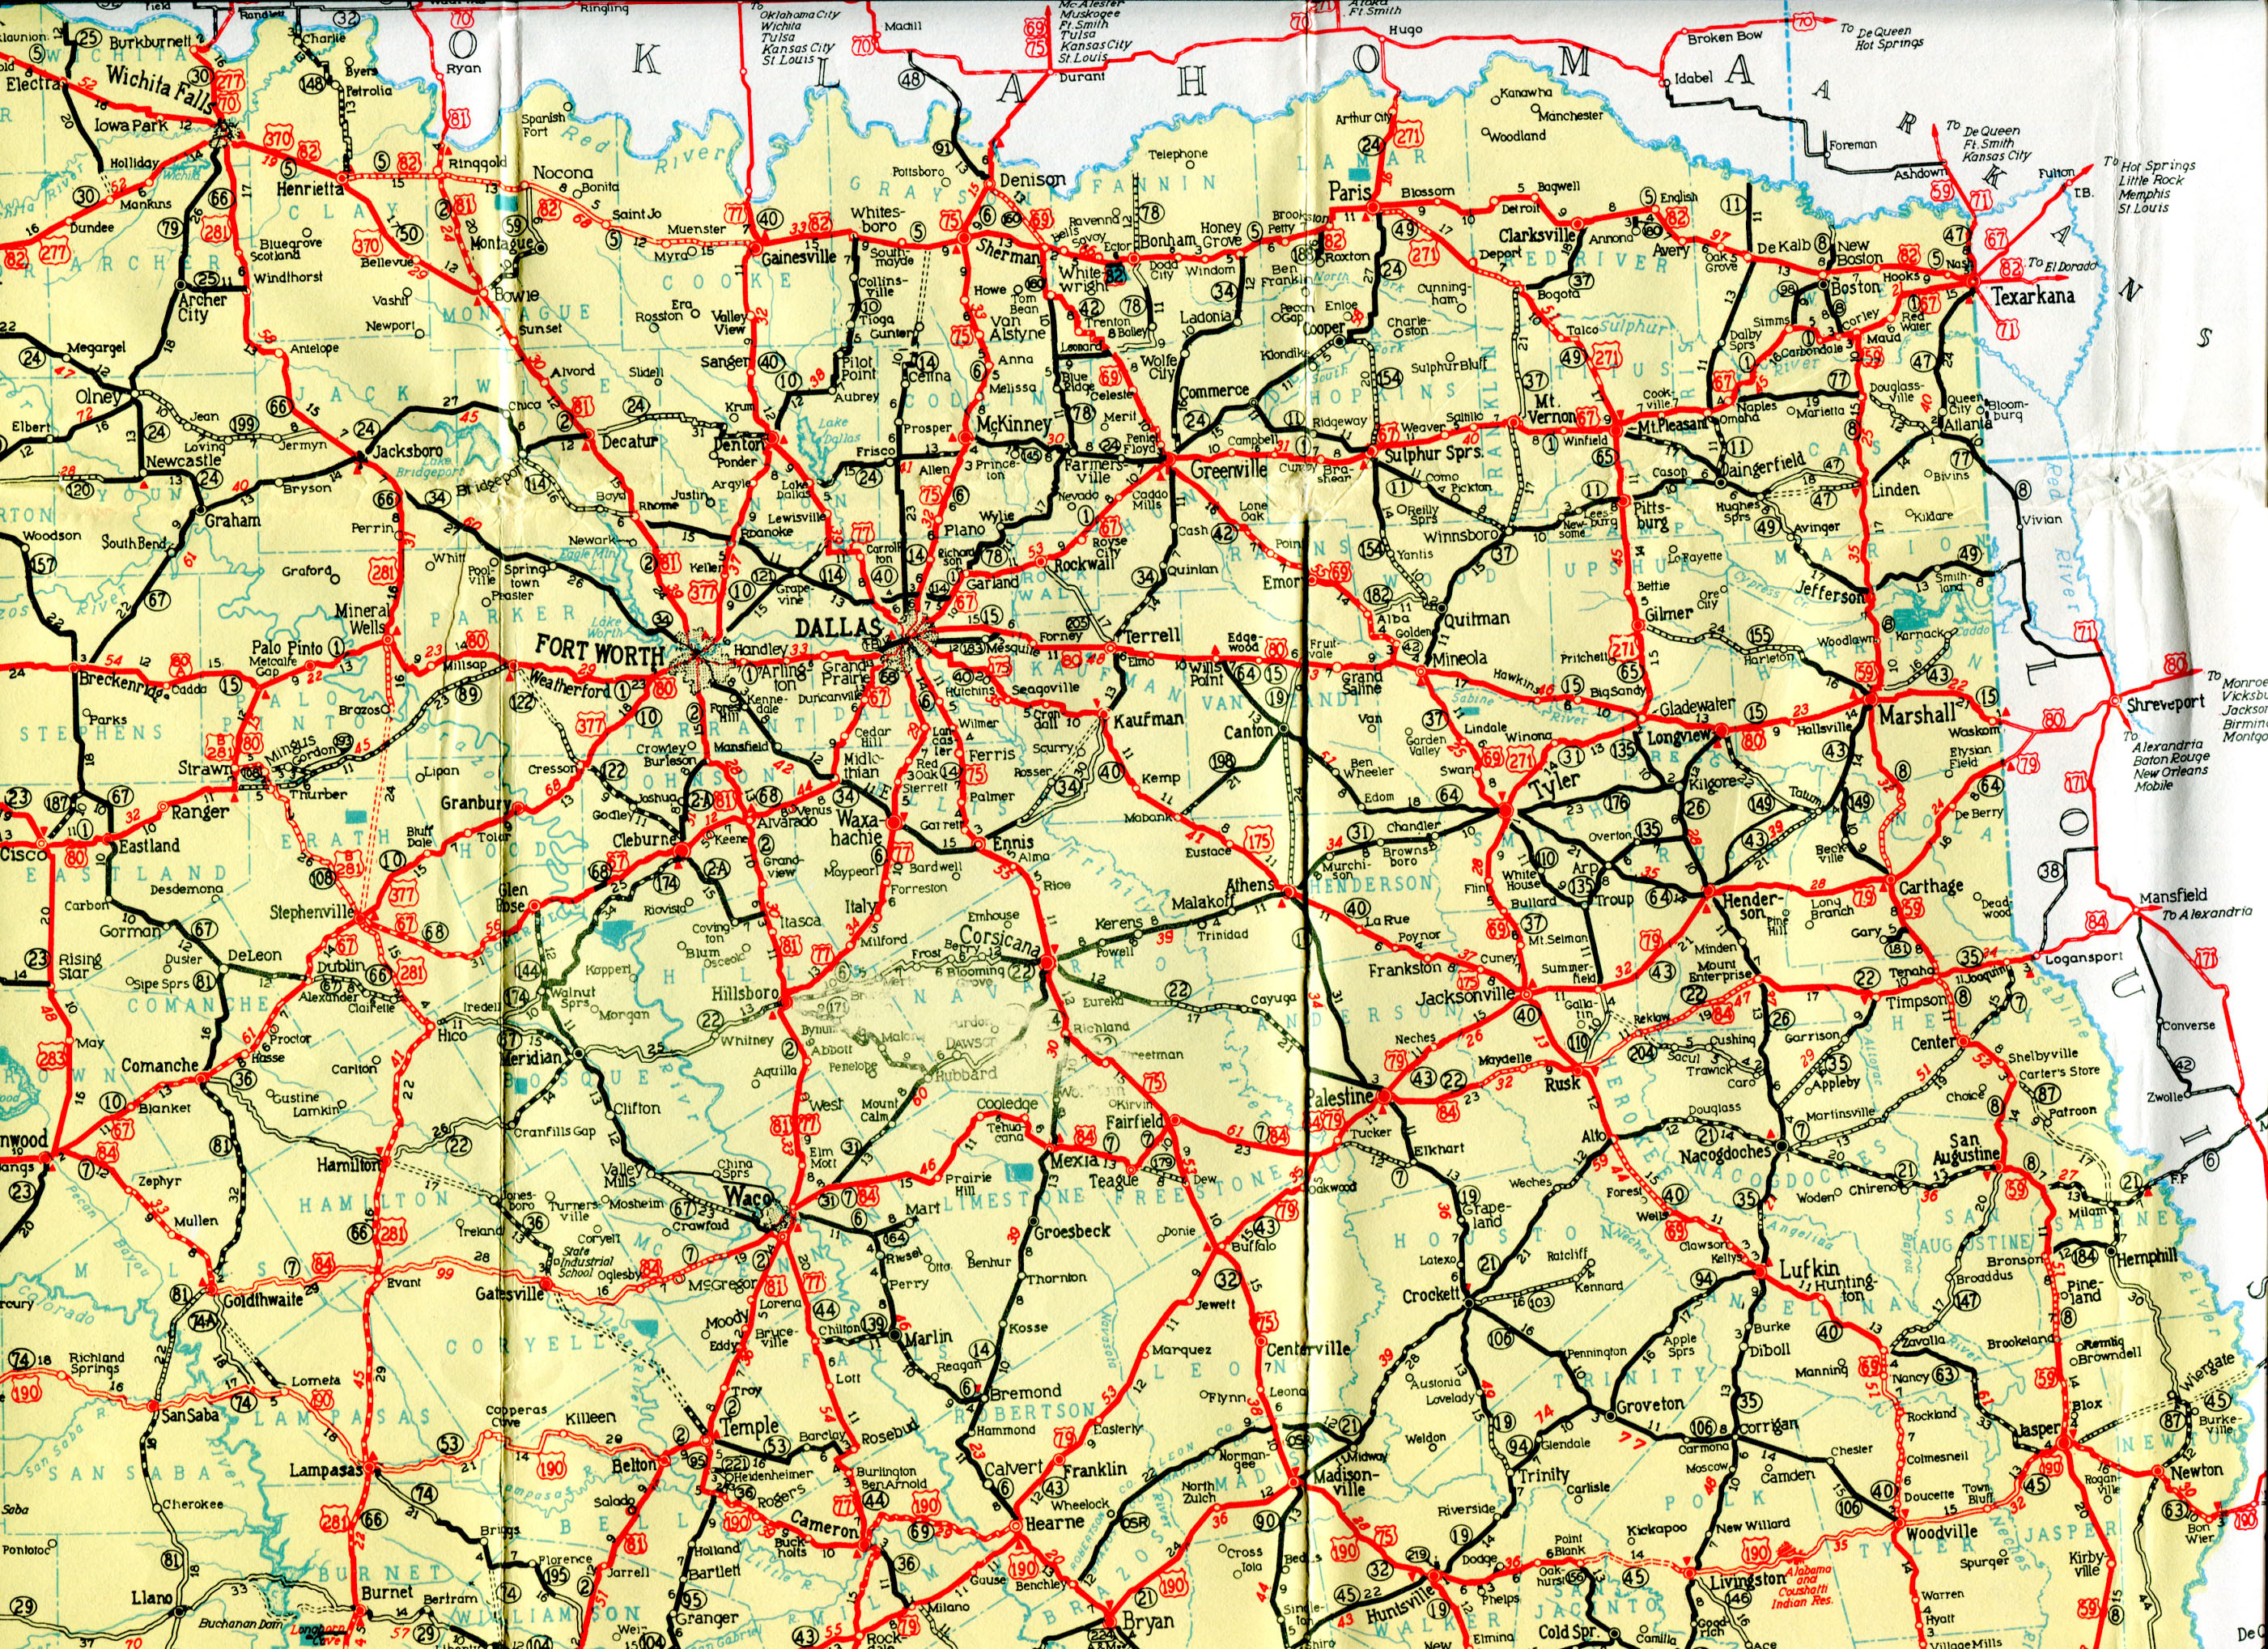 Old Highway Maps Of Texas - Official Texas Highway Map